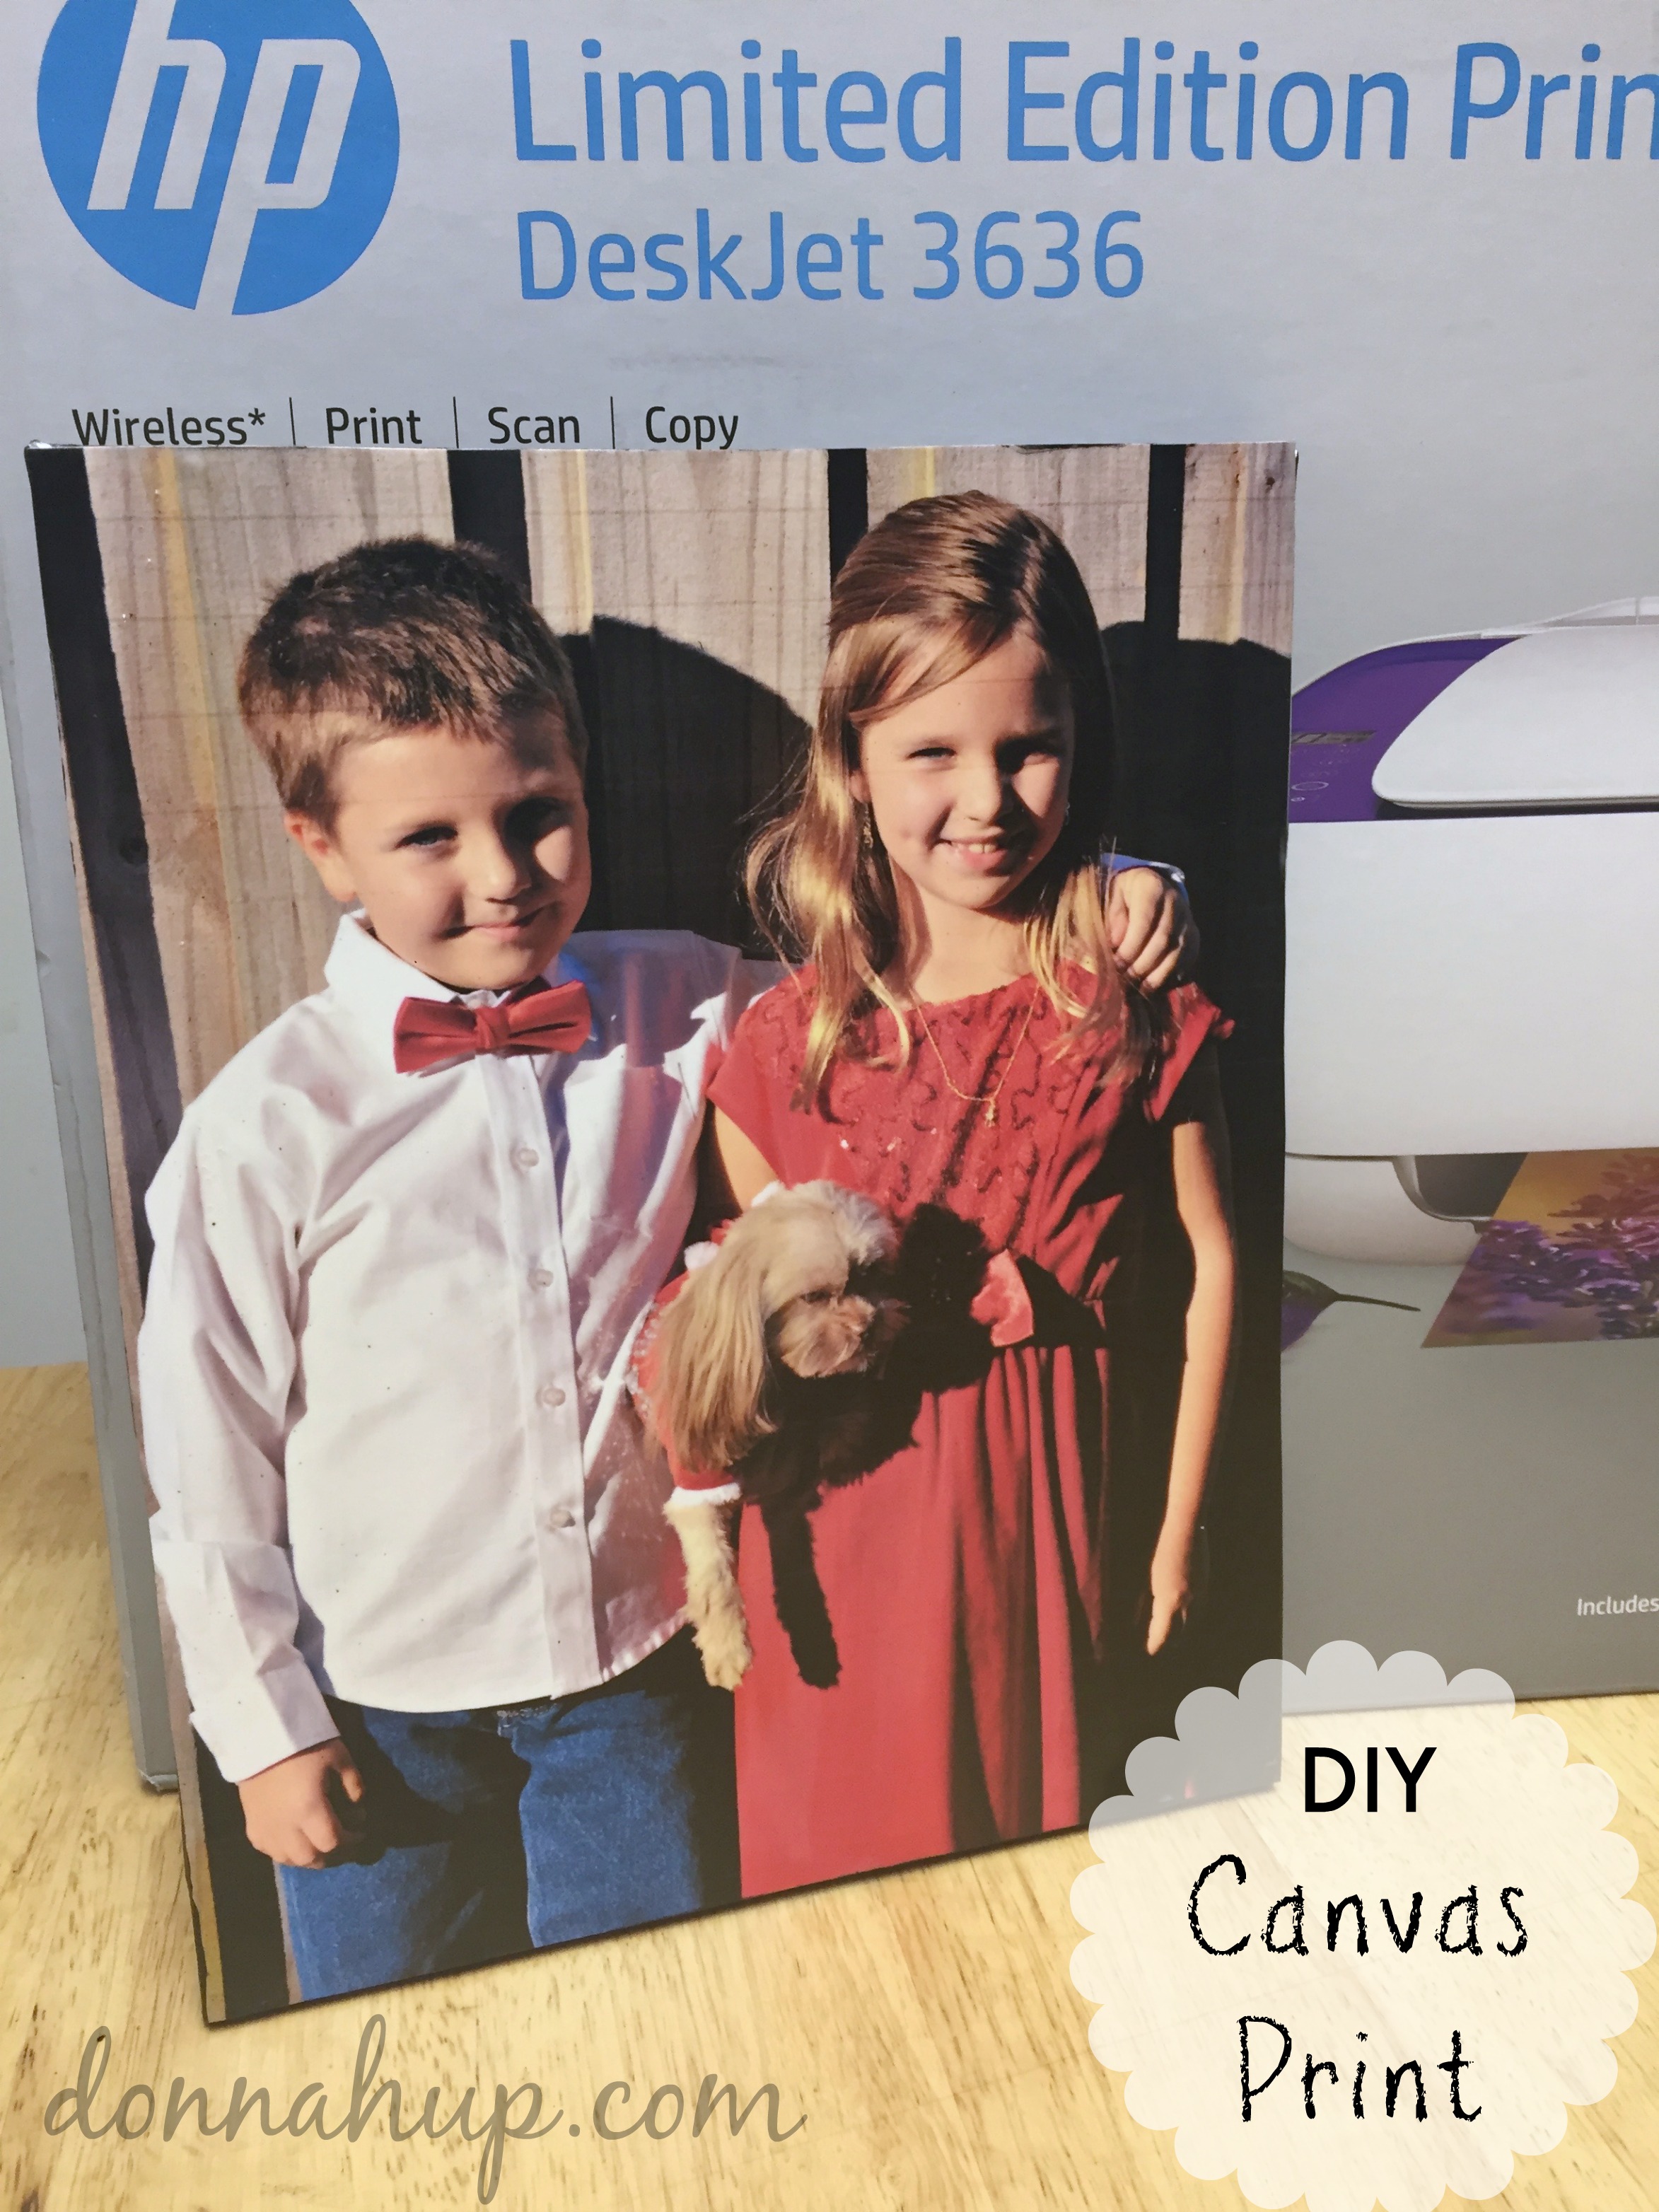 DIY Canvas Print - Make your own faux Canvas Print #CreateWithHP